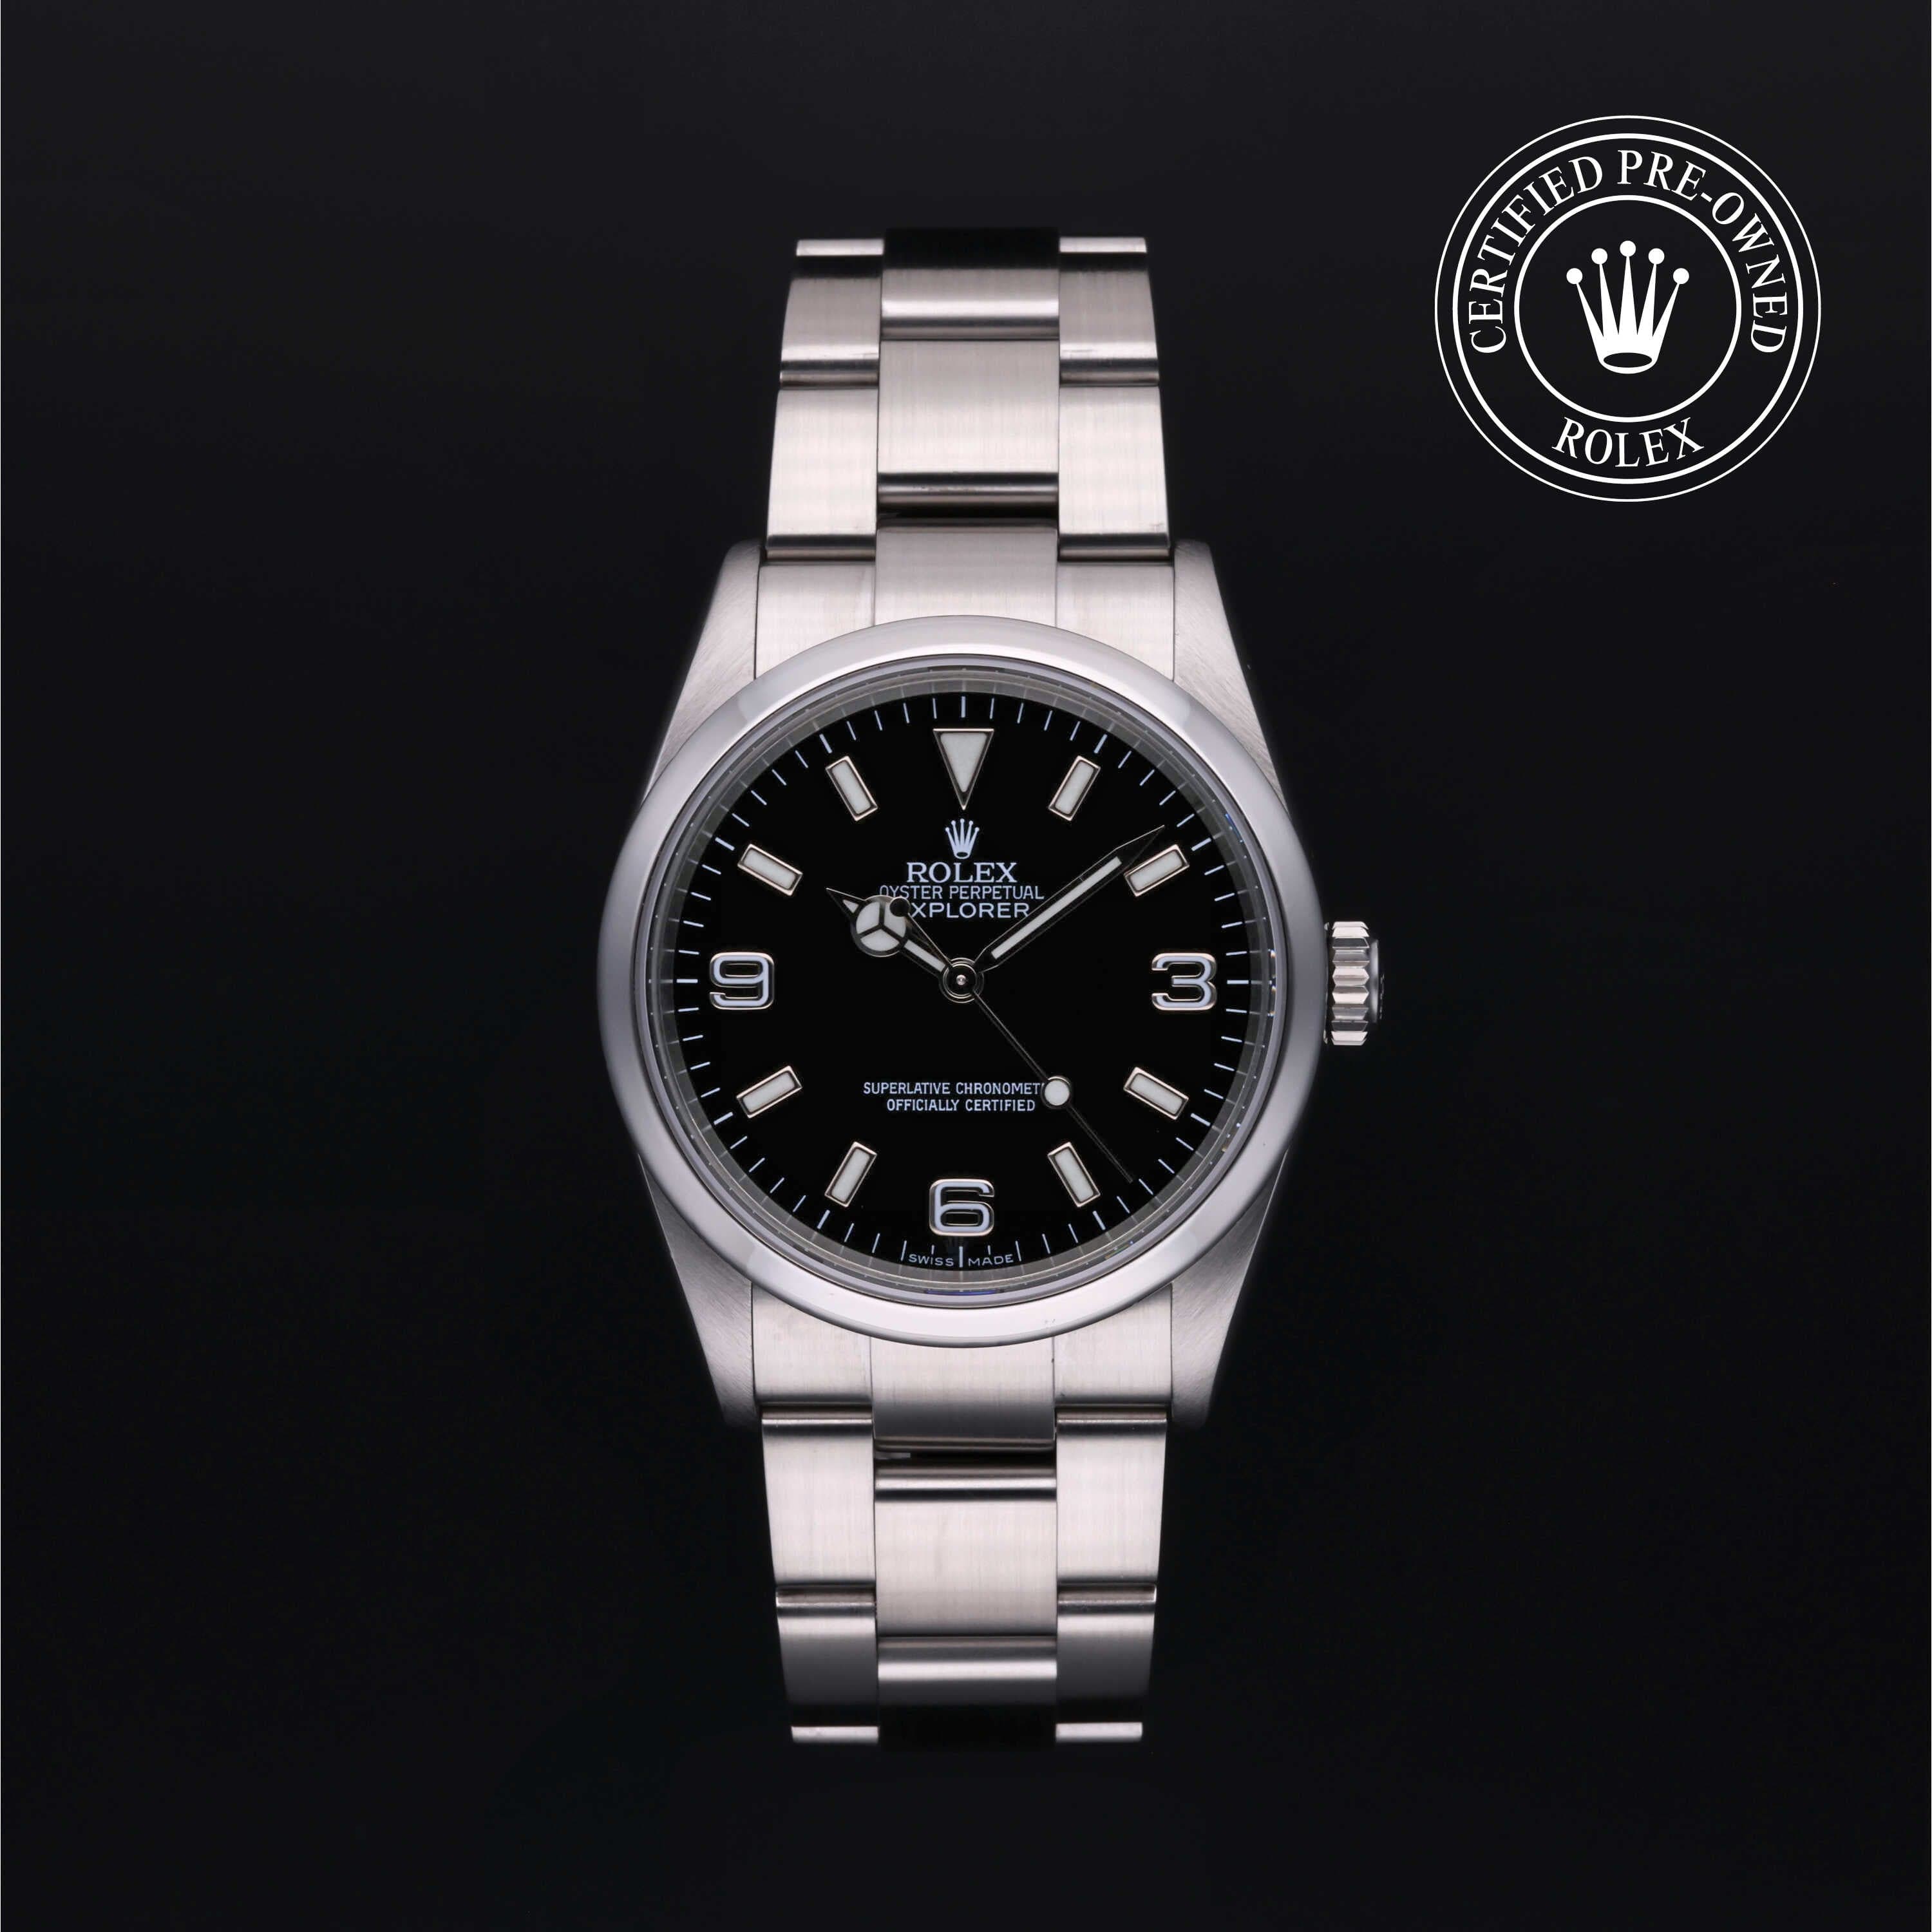 Rolex Certified Pre-Owned Explorer in Oyster, 36 mm, Stainless Steel 114270 watch 